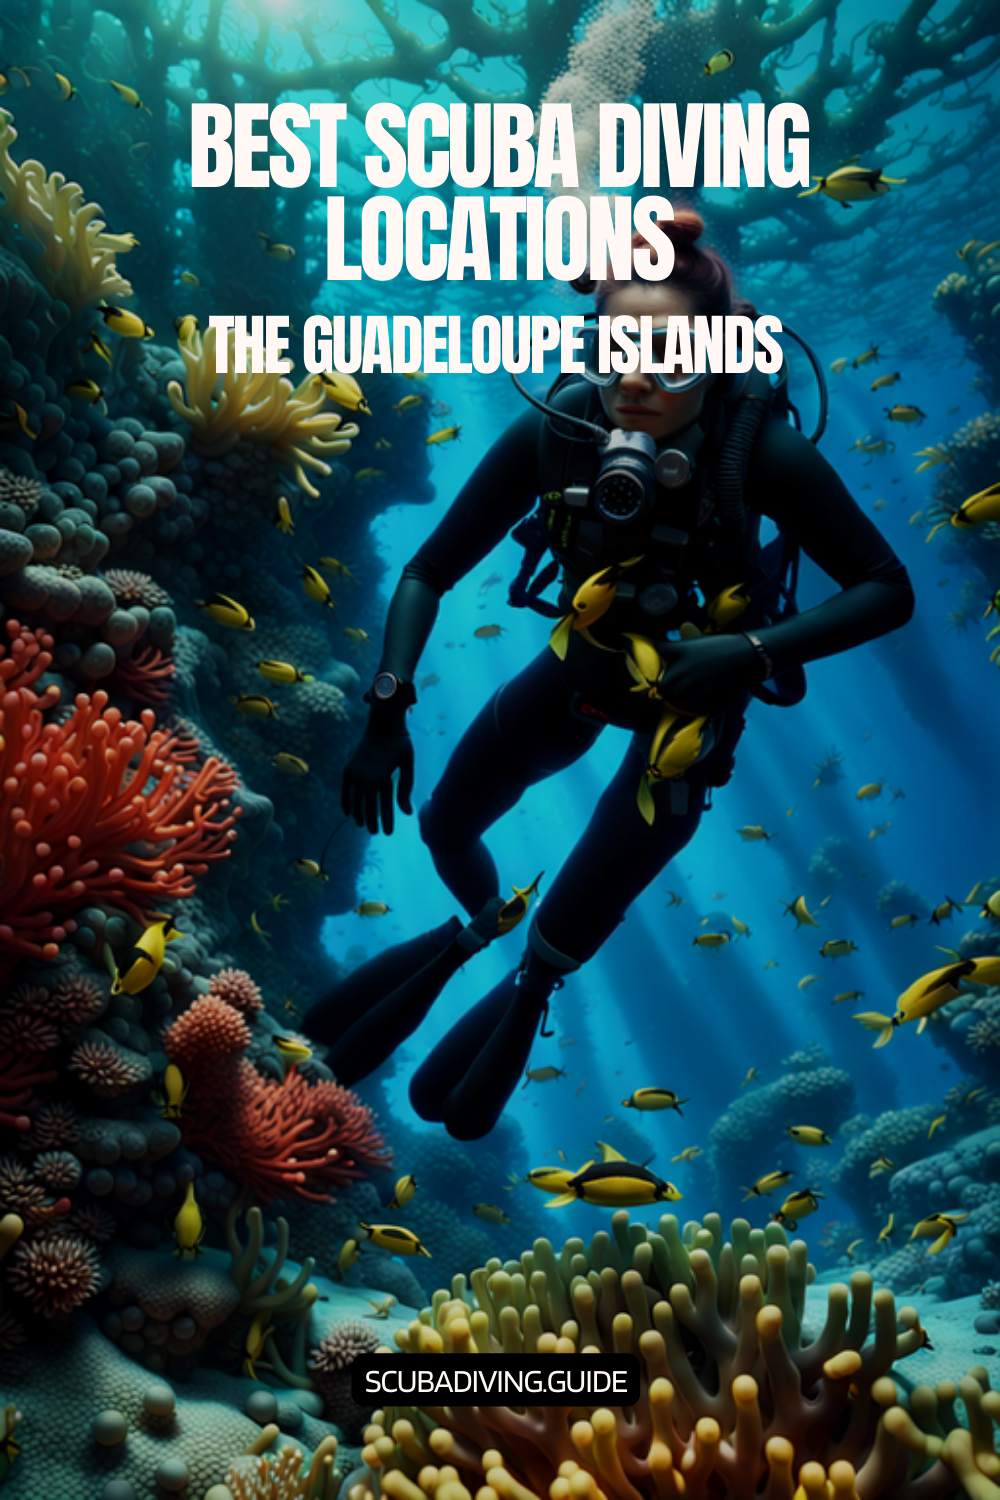 Scuba Diving Locations in The Guadeloupe Islands